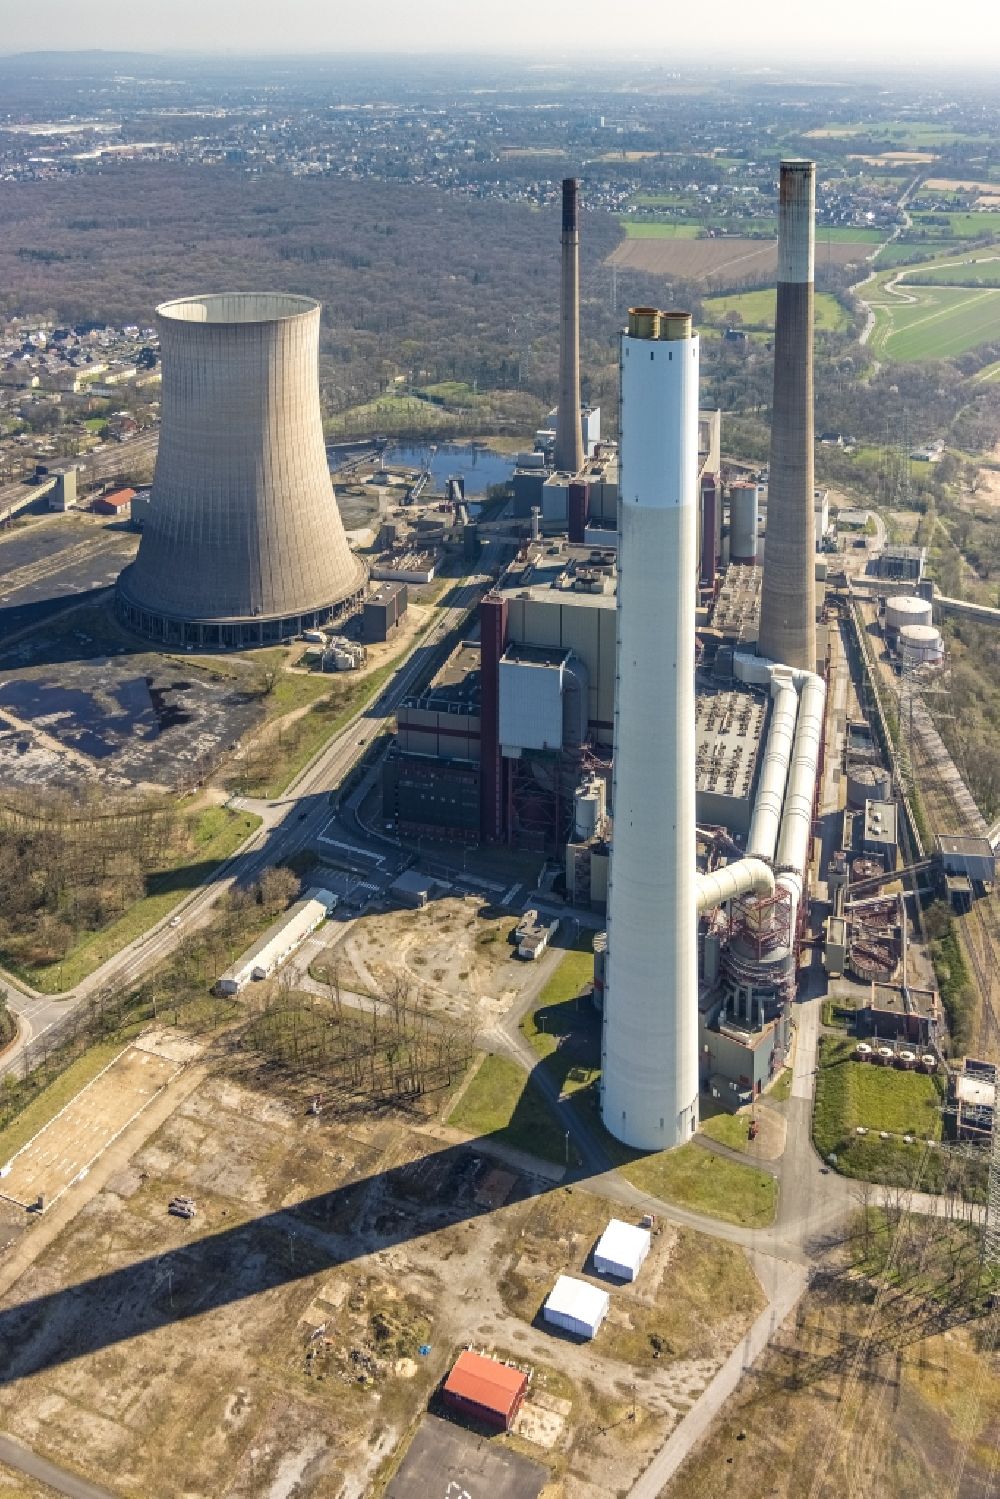 Möllen from above - Power plants and exhaust towers of coal thermal power station of Steag Energy Services GmbH in Moellen in the state North Rhine-Westphalia